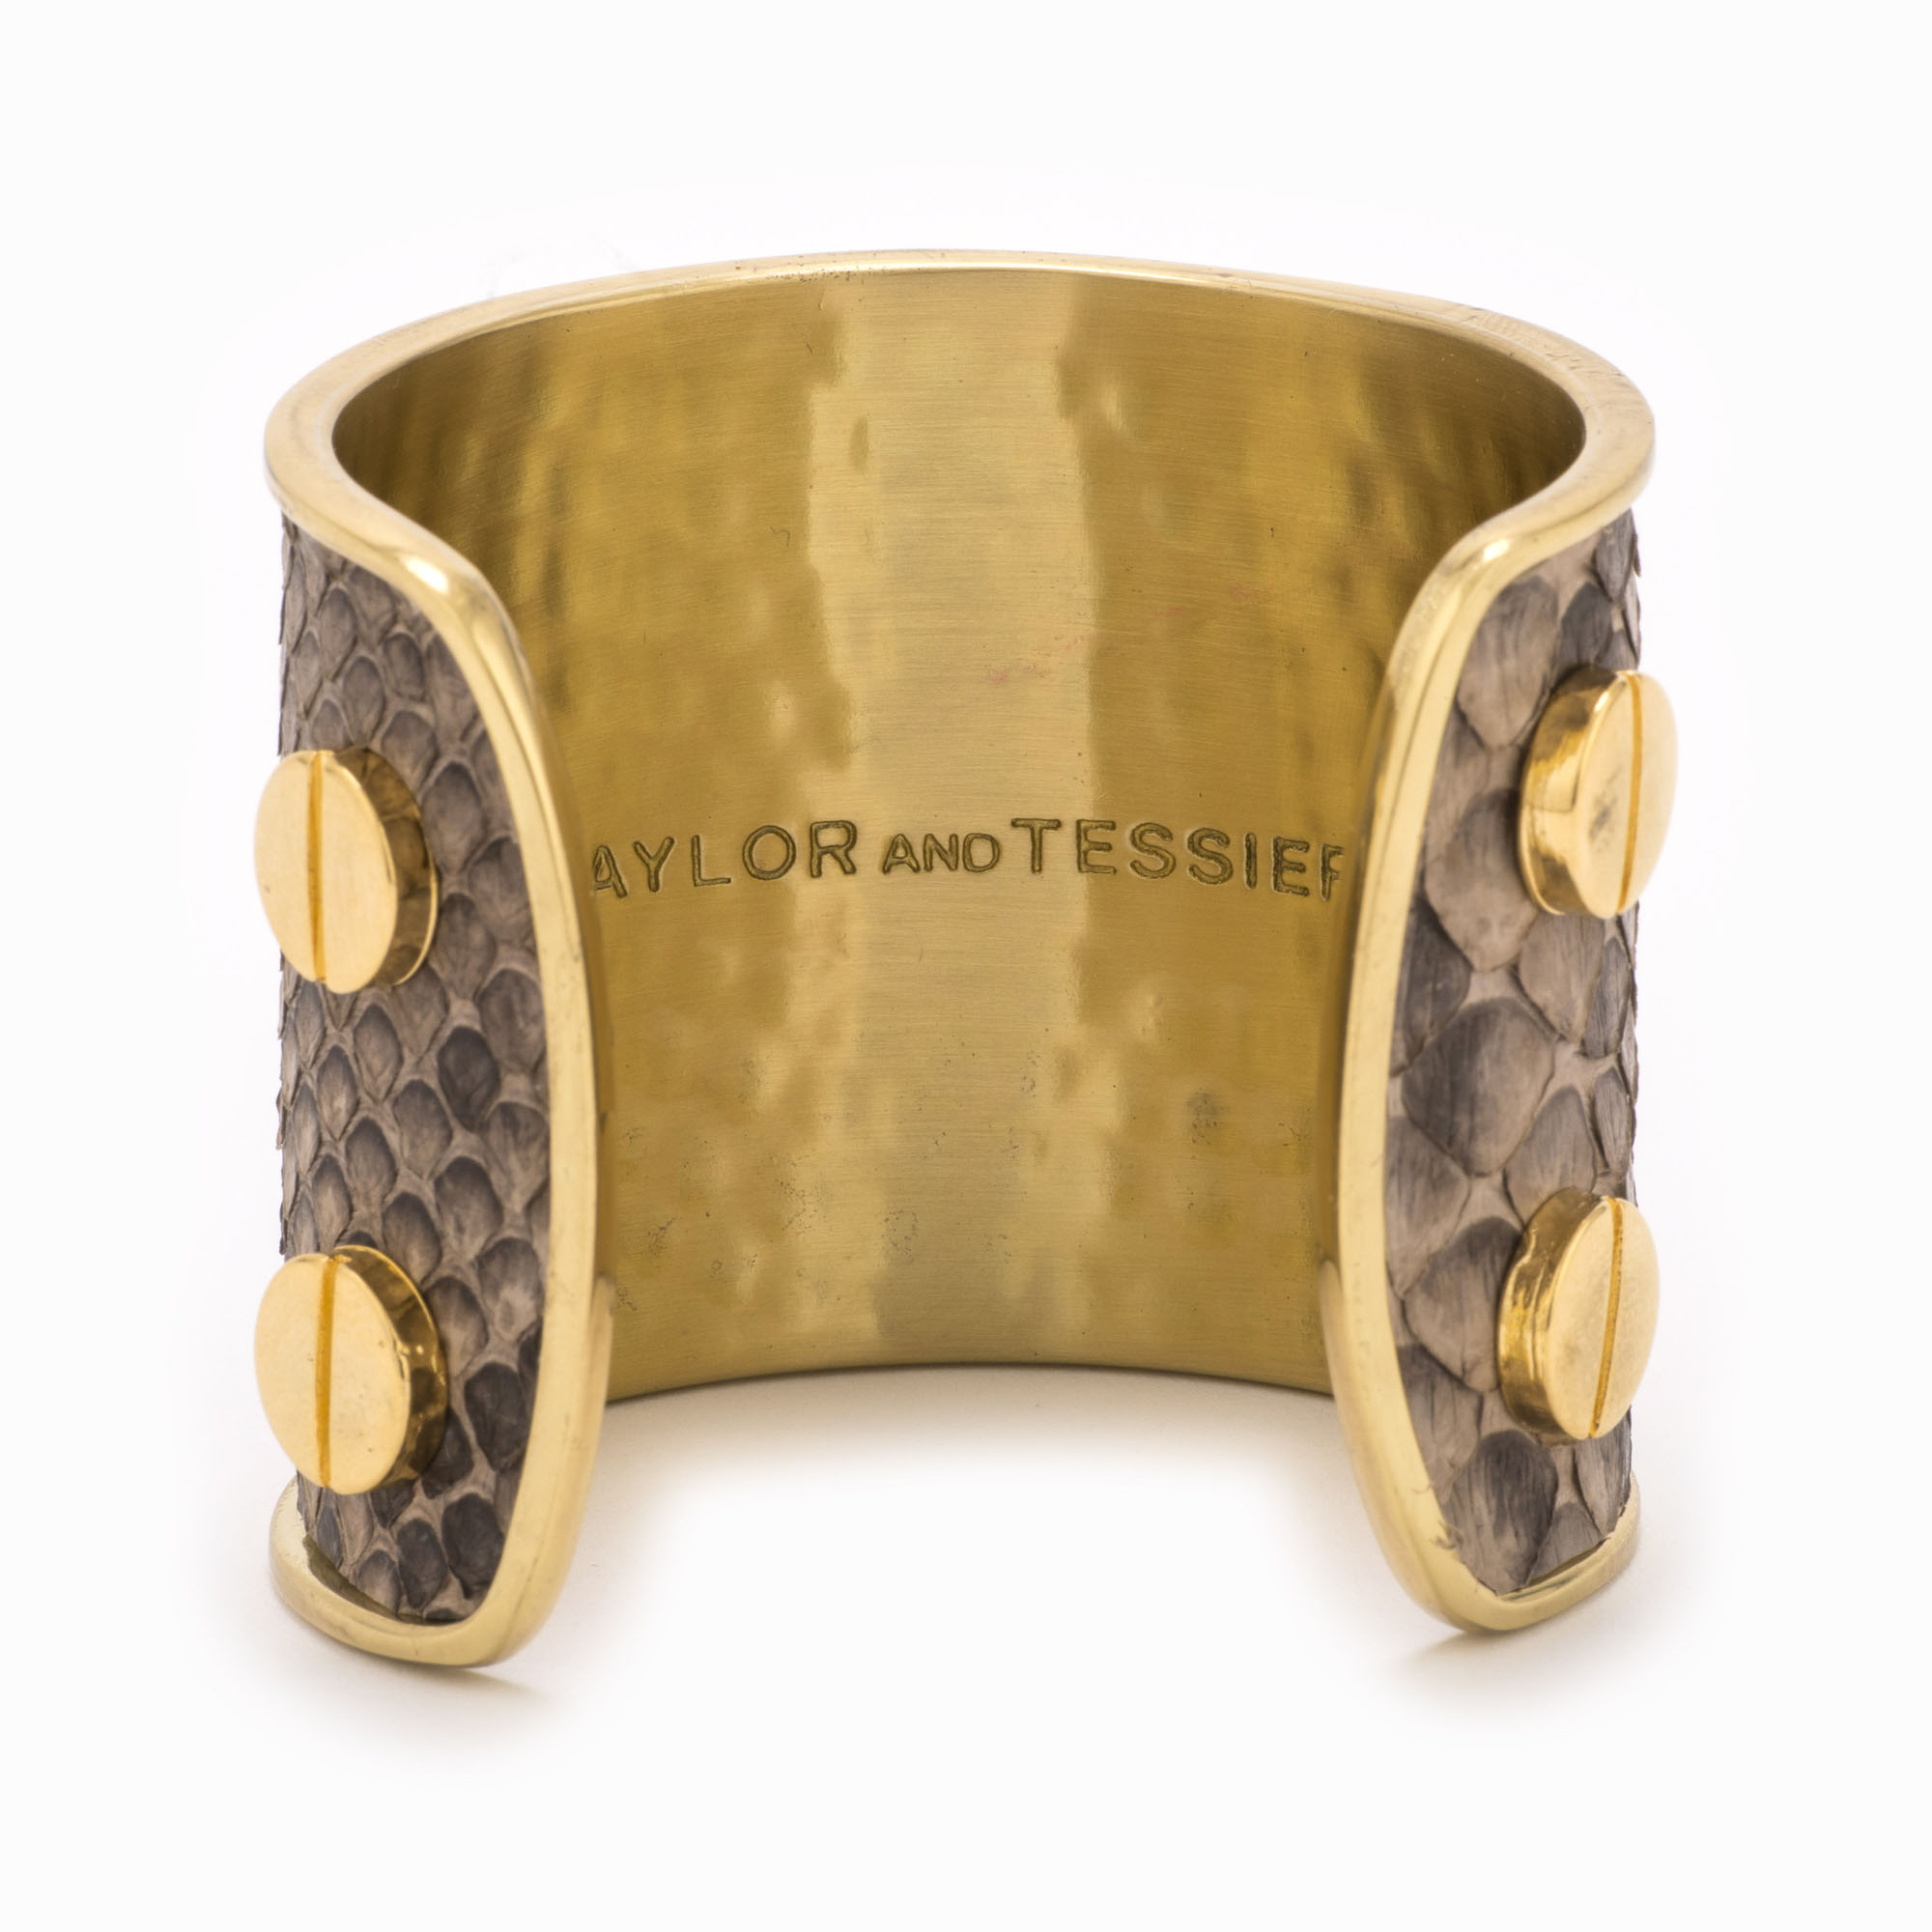 A large gold cuff with grey and brown colored snakeskin pattern inlaid.